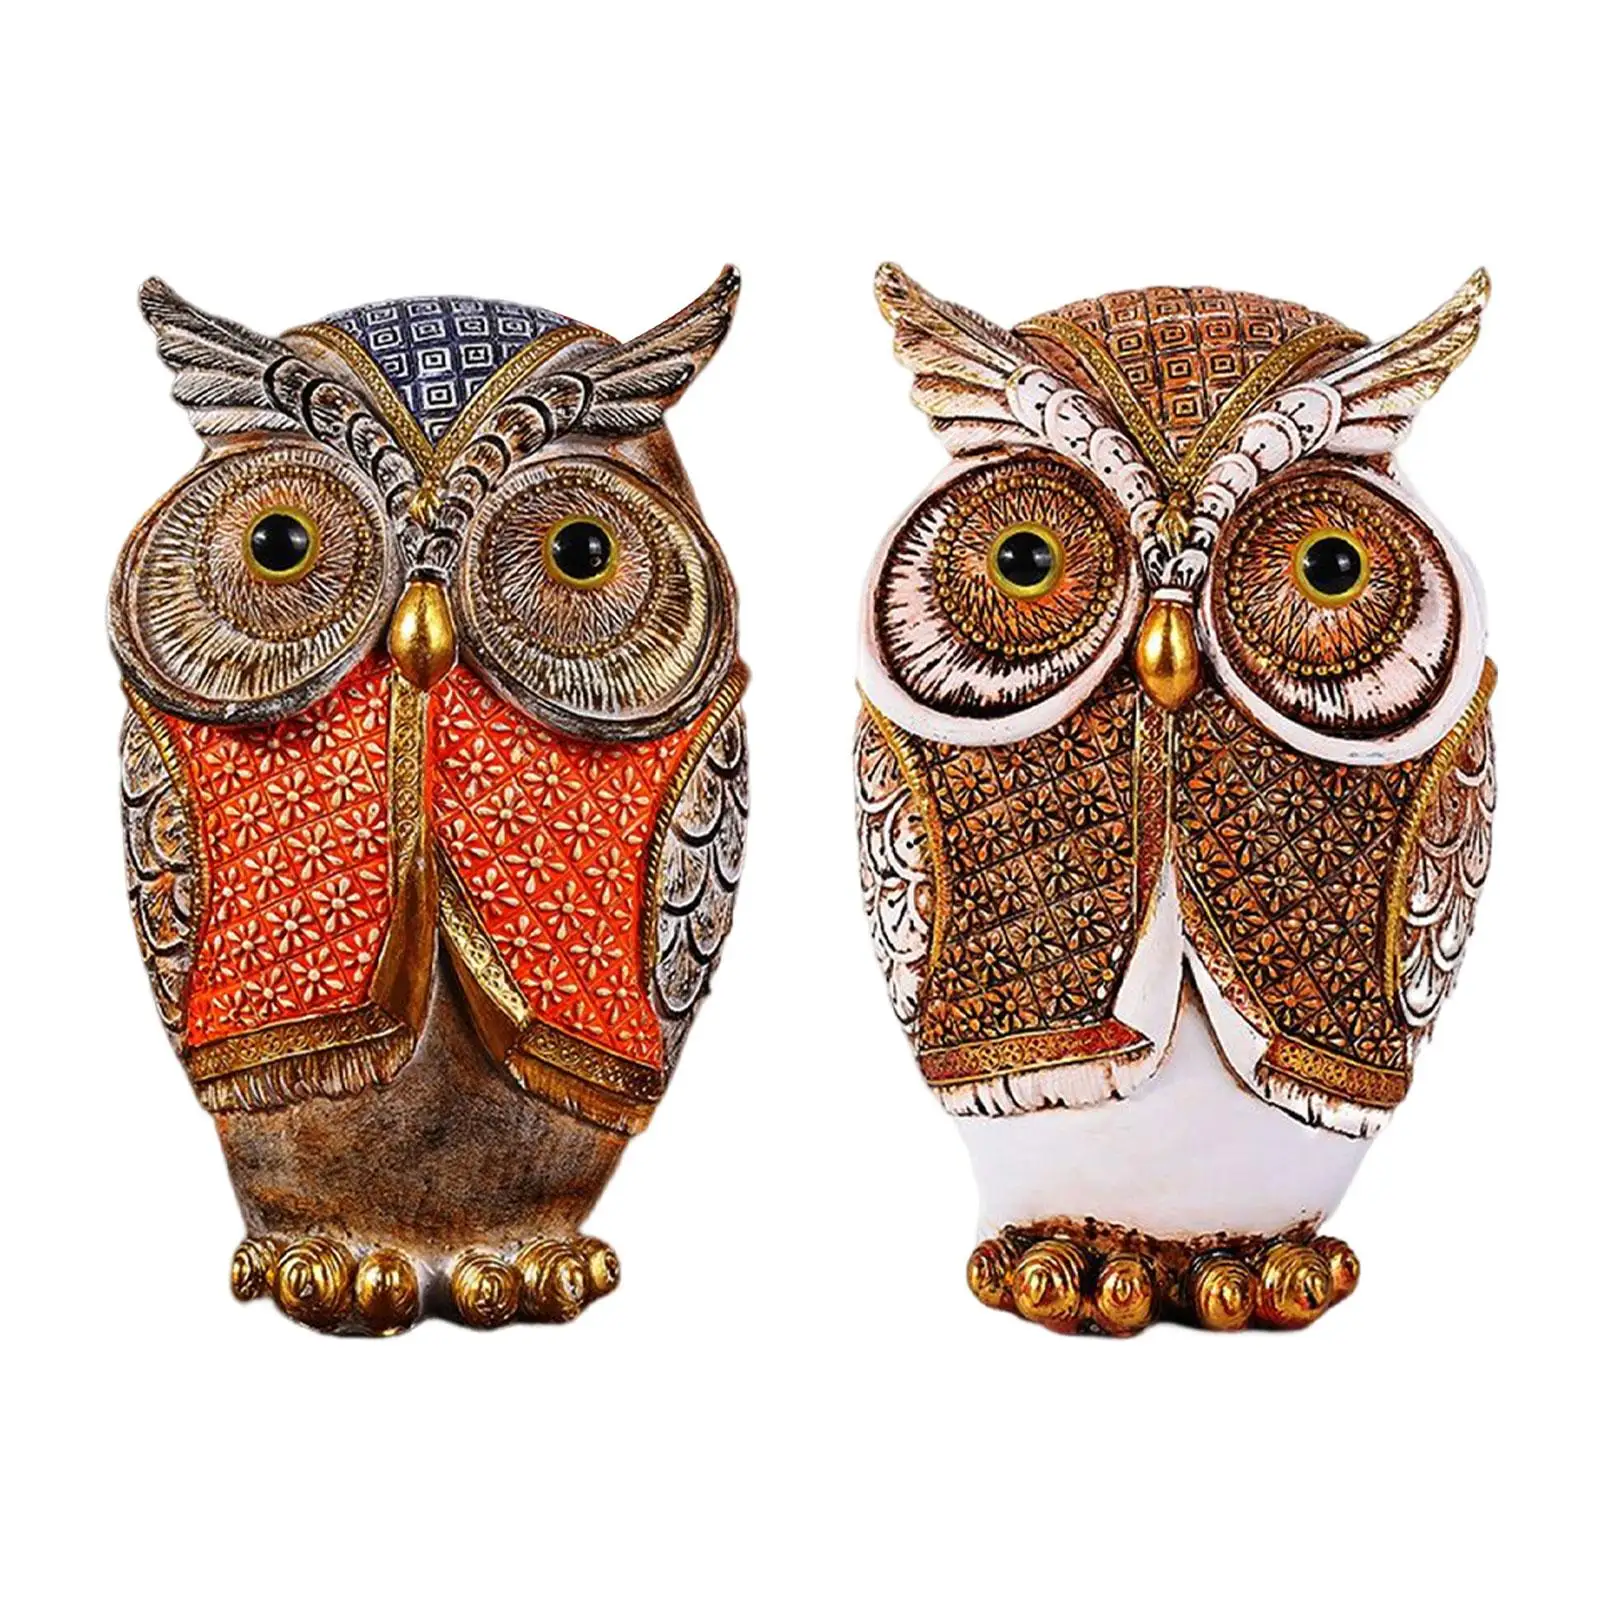 Nordic Owl Figurines Art Ornament Gifts Resin Crafts Realistic Decor Animal Statue for Home Garden Bathroom Living Room Shelf